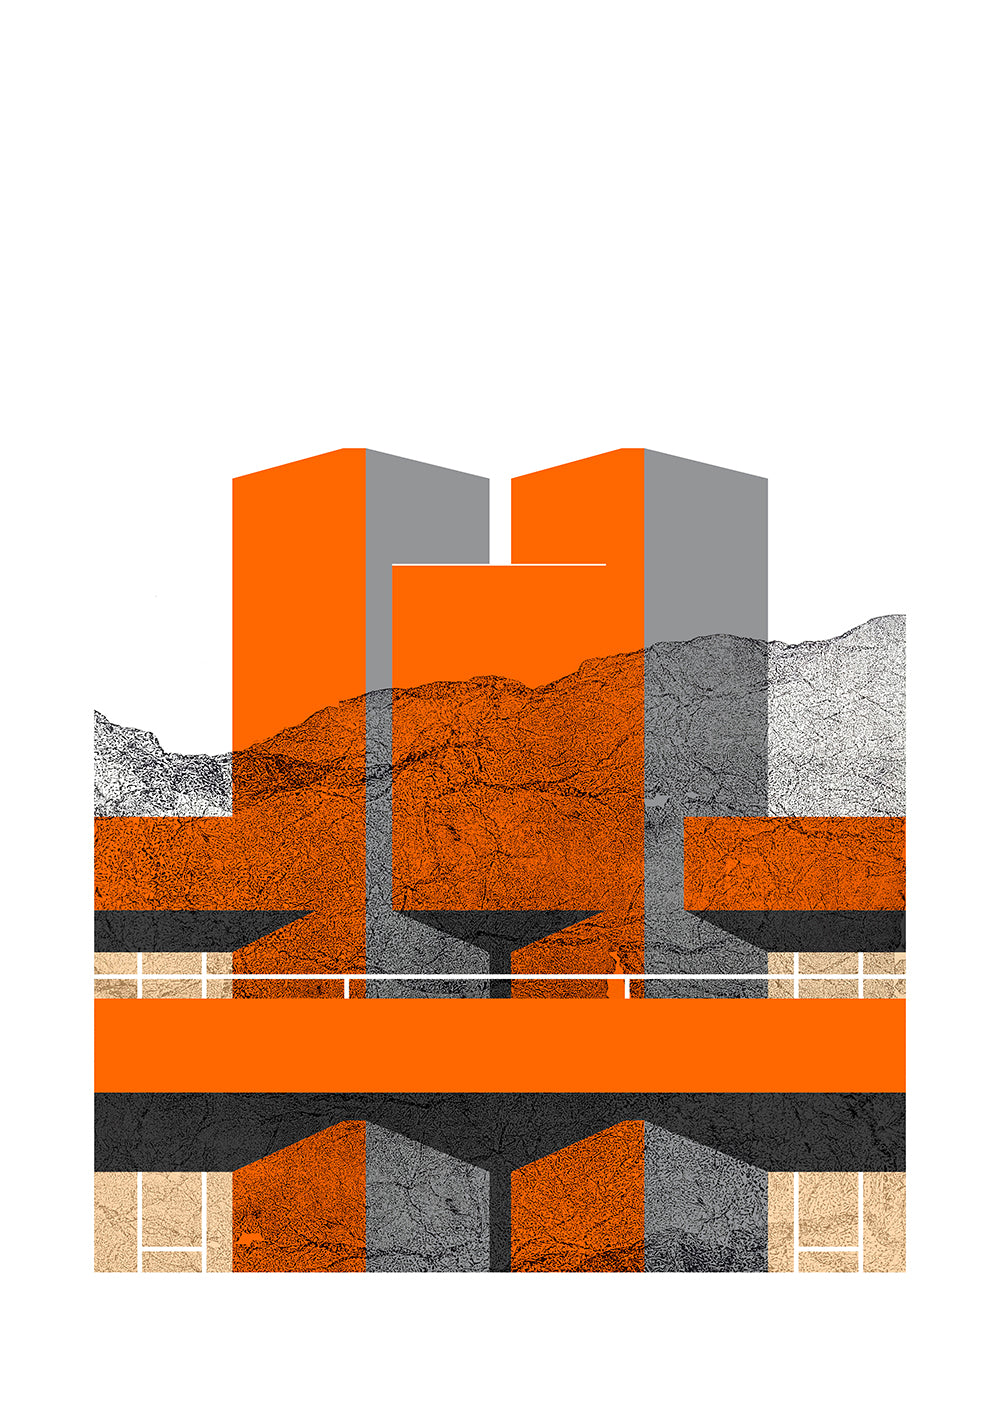 Hamish Macaulay- Royal National Theater Orange, Limited edition -TAP Galleries 